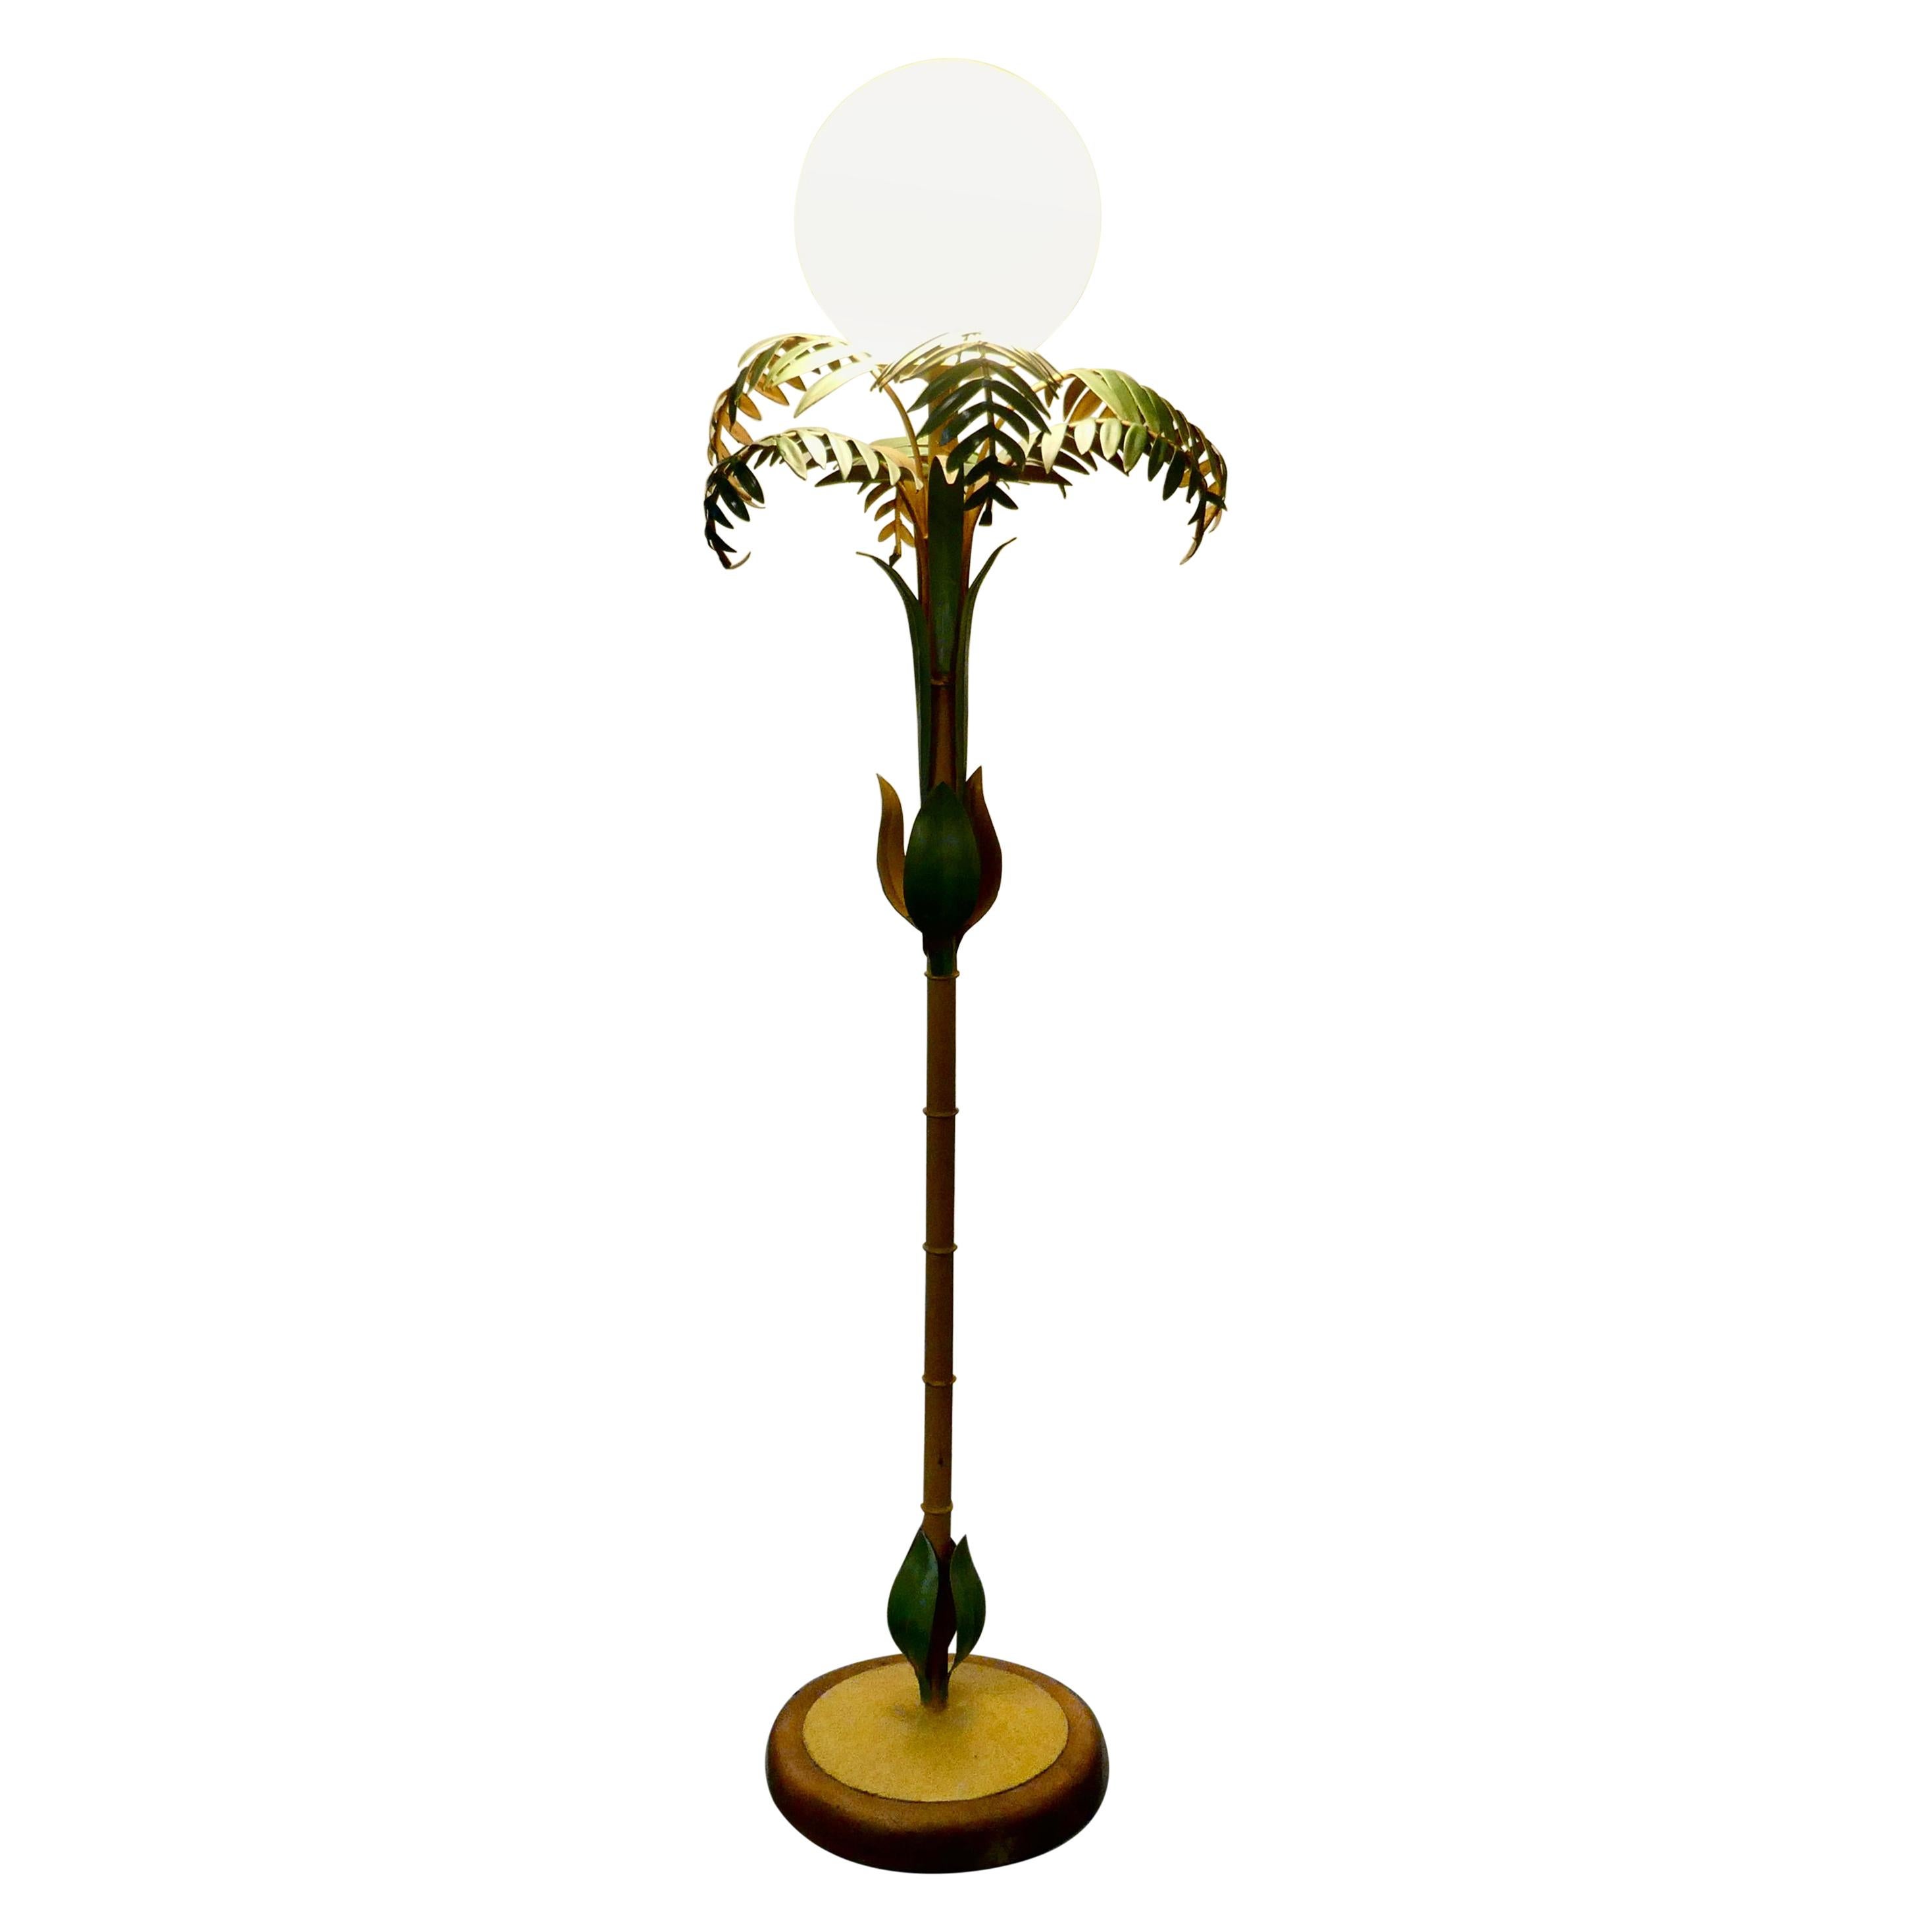 Unusual French Conservatory Painted Toleware Floor Lamp